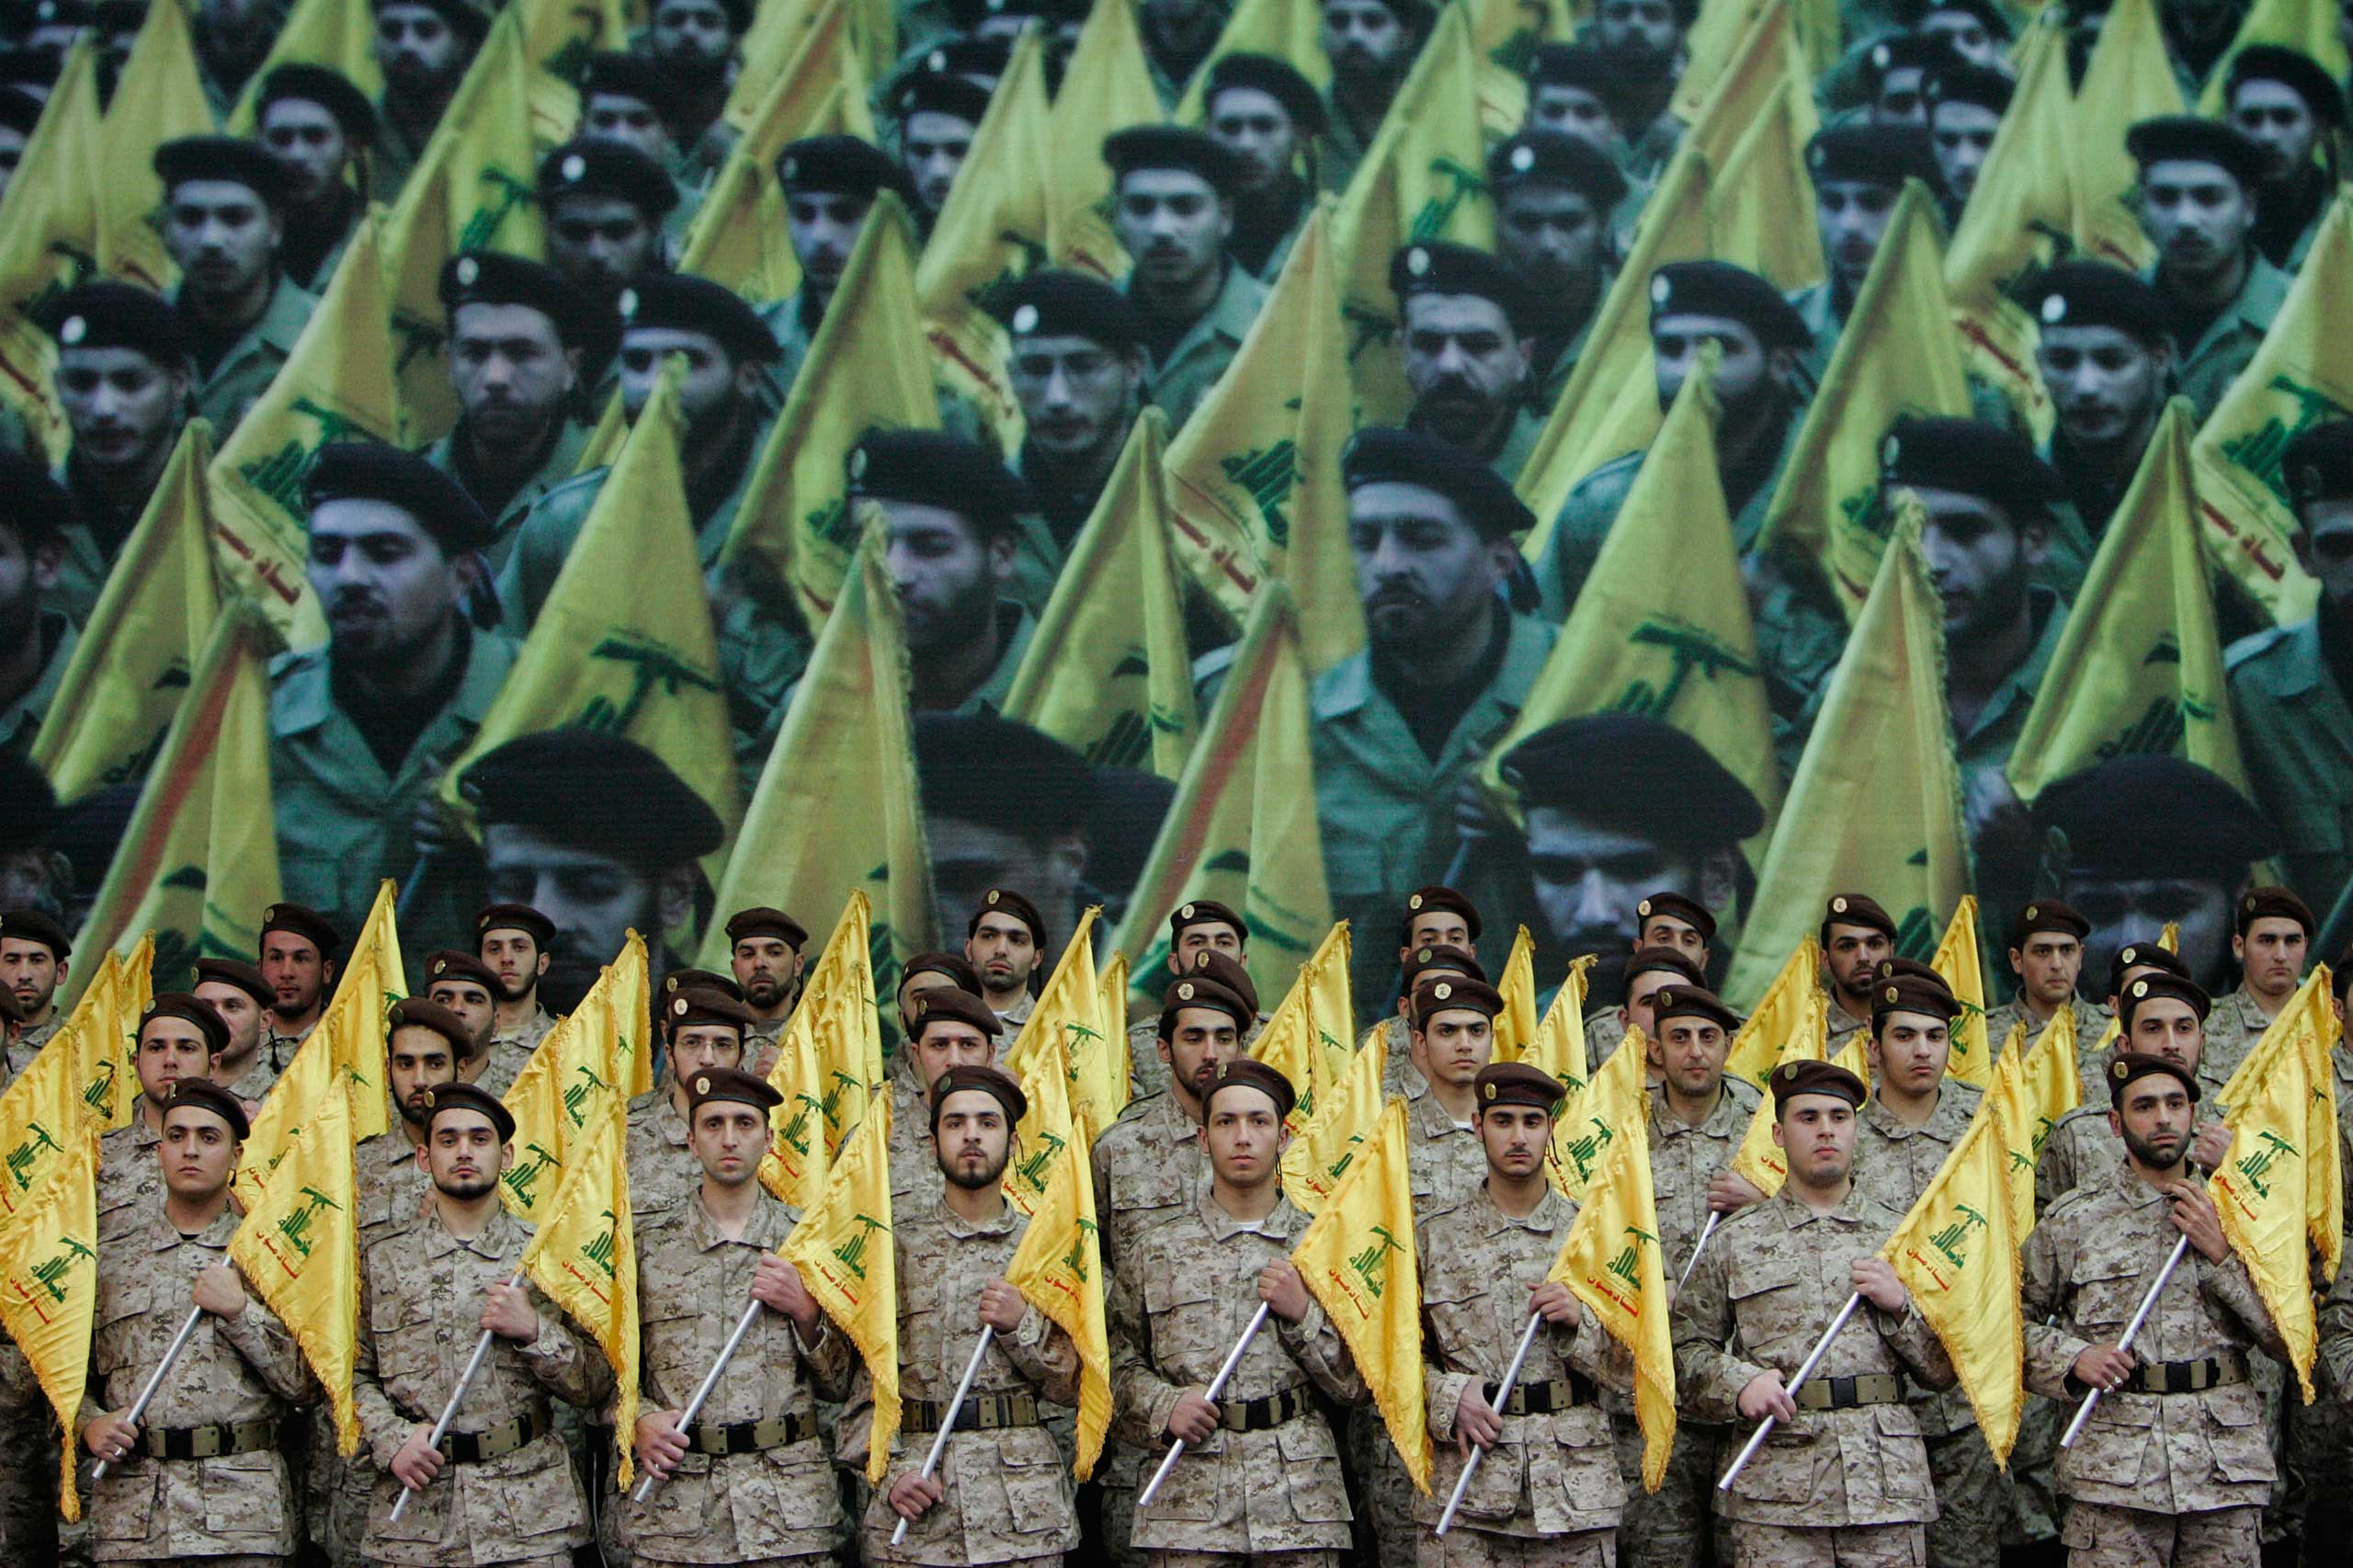 Hezbollah fighters hold their party flags as they attend a rally to commemorate slain top Hezbollah commander Imad Mughniyeh and two other leaders, Abbas Musawi and Ragheb Harb, in the Shiite suburb of Beirut, Feb. 22, 2008. (Hussein Malla—AP)